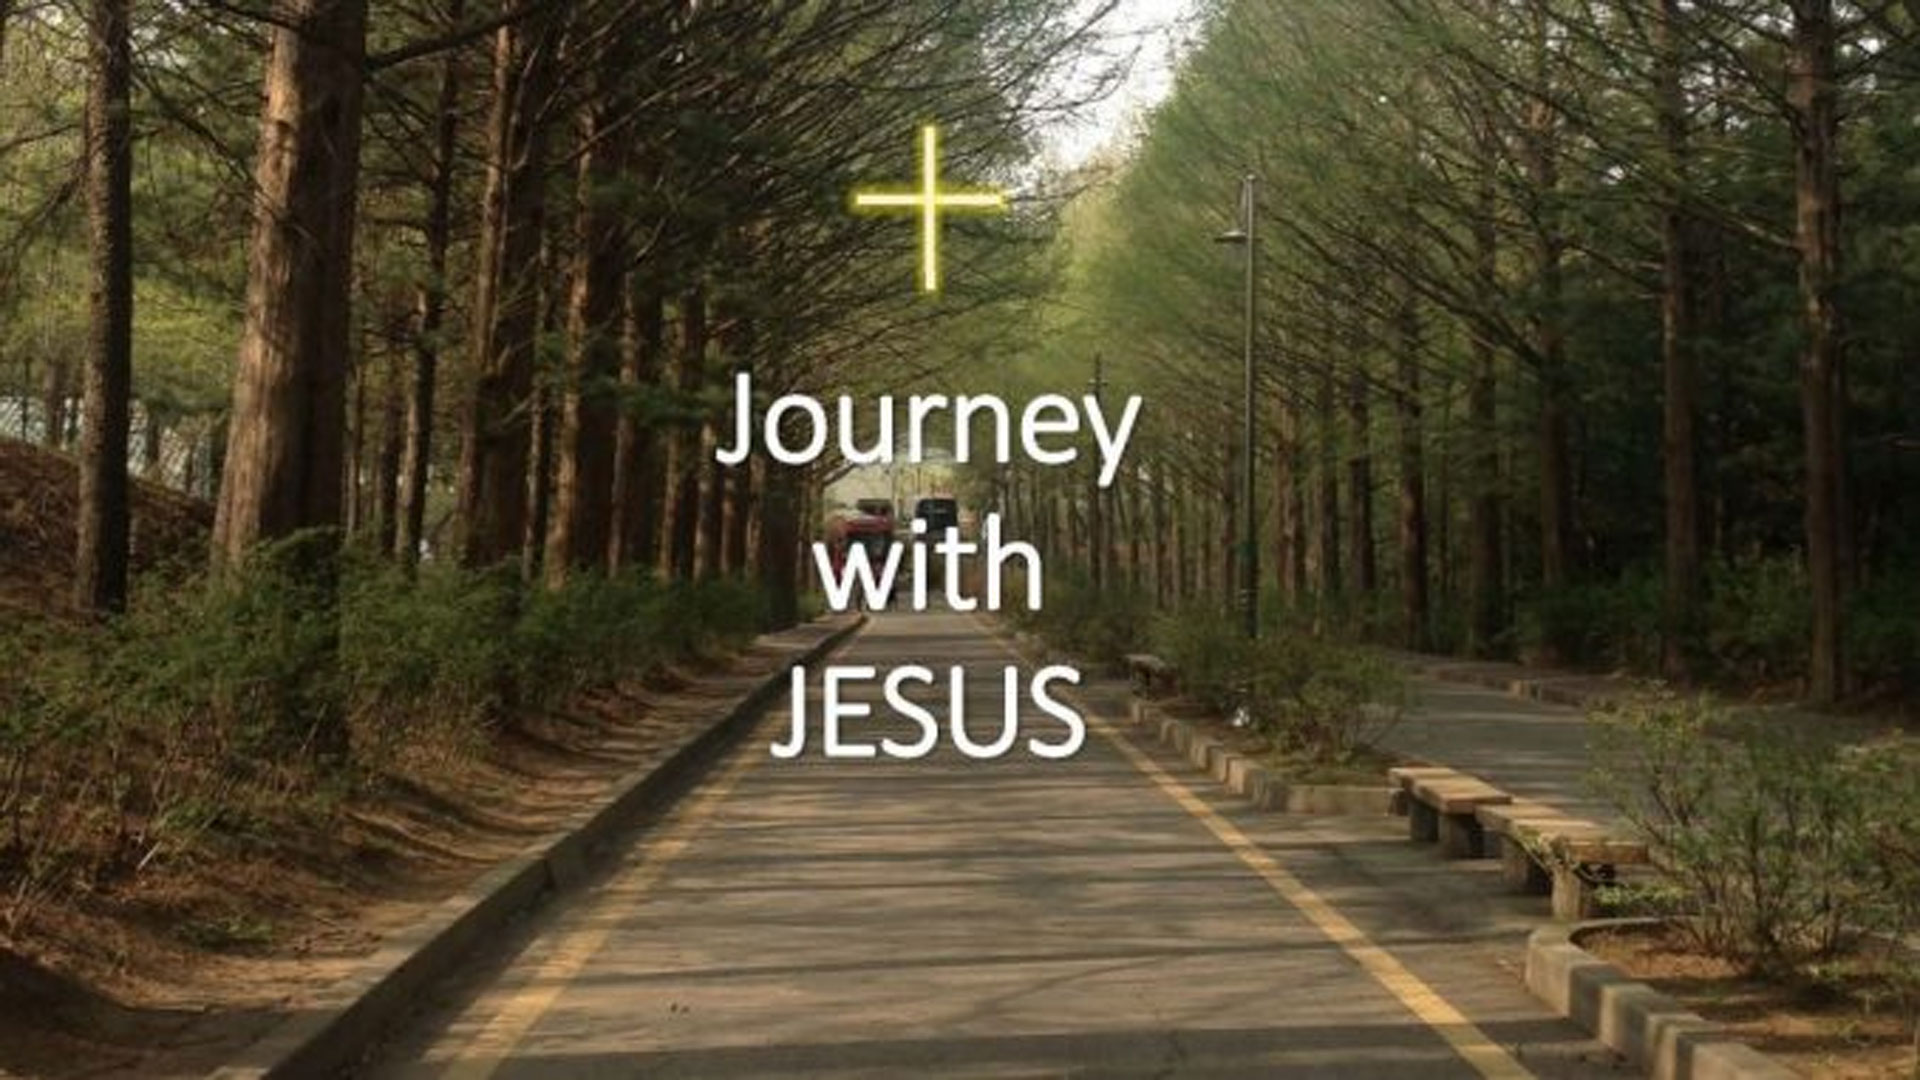 Journeying with Christ